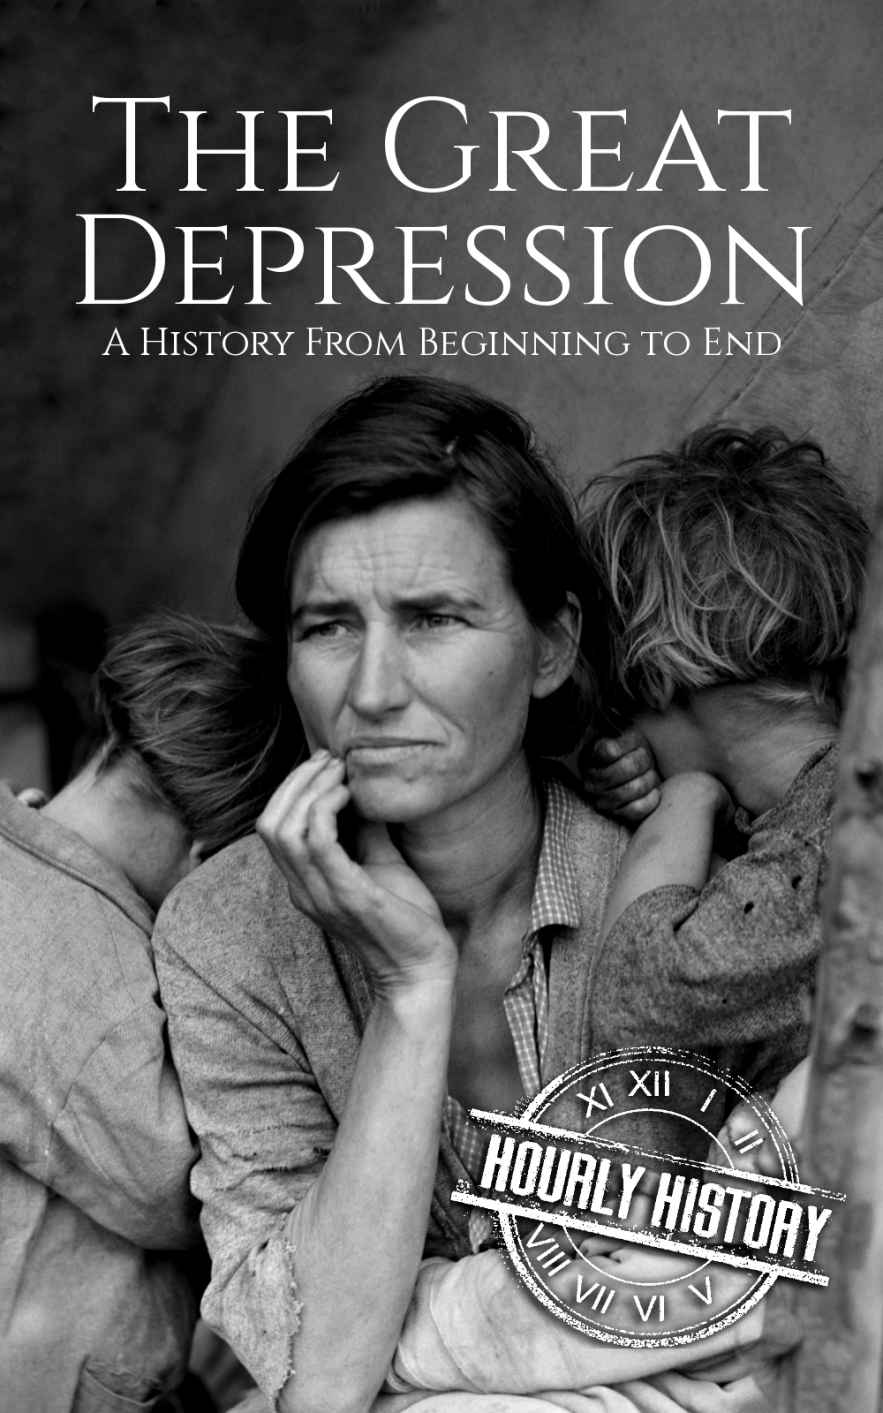 The Great Depression: A History From Beginning to End